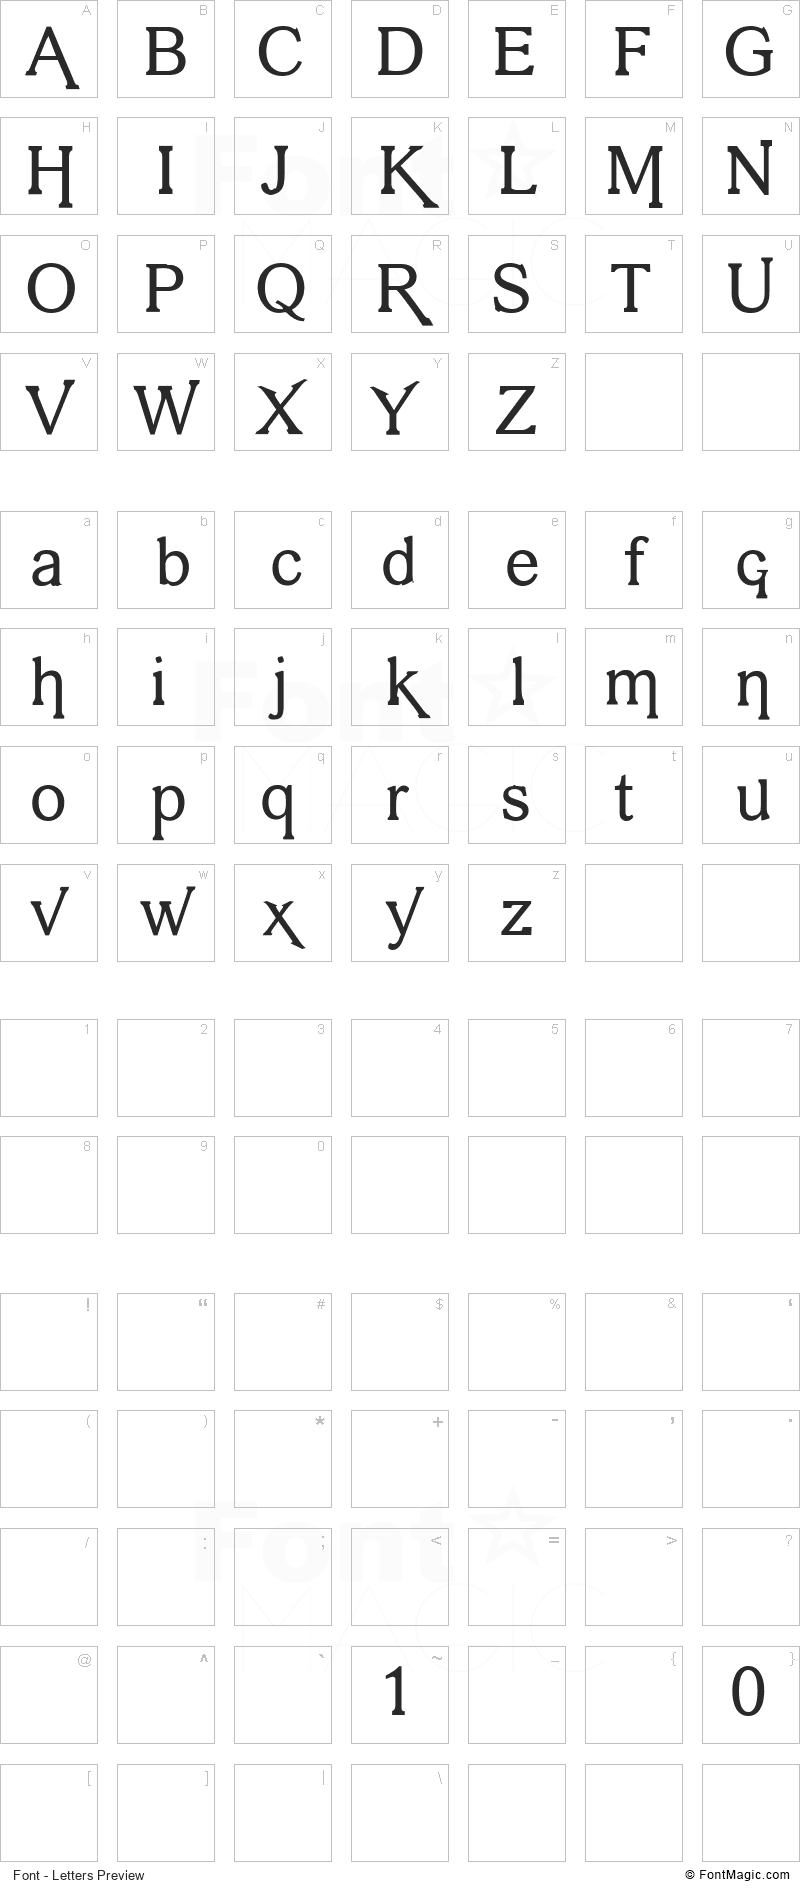 Vengeance Font - All Latters Preview Chart